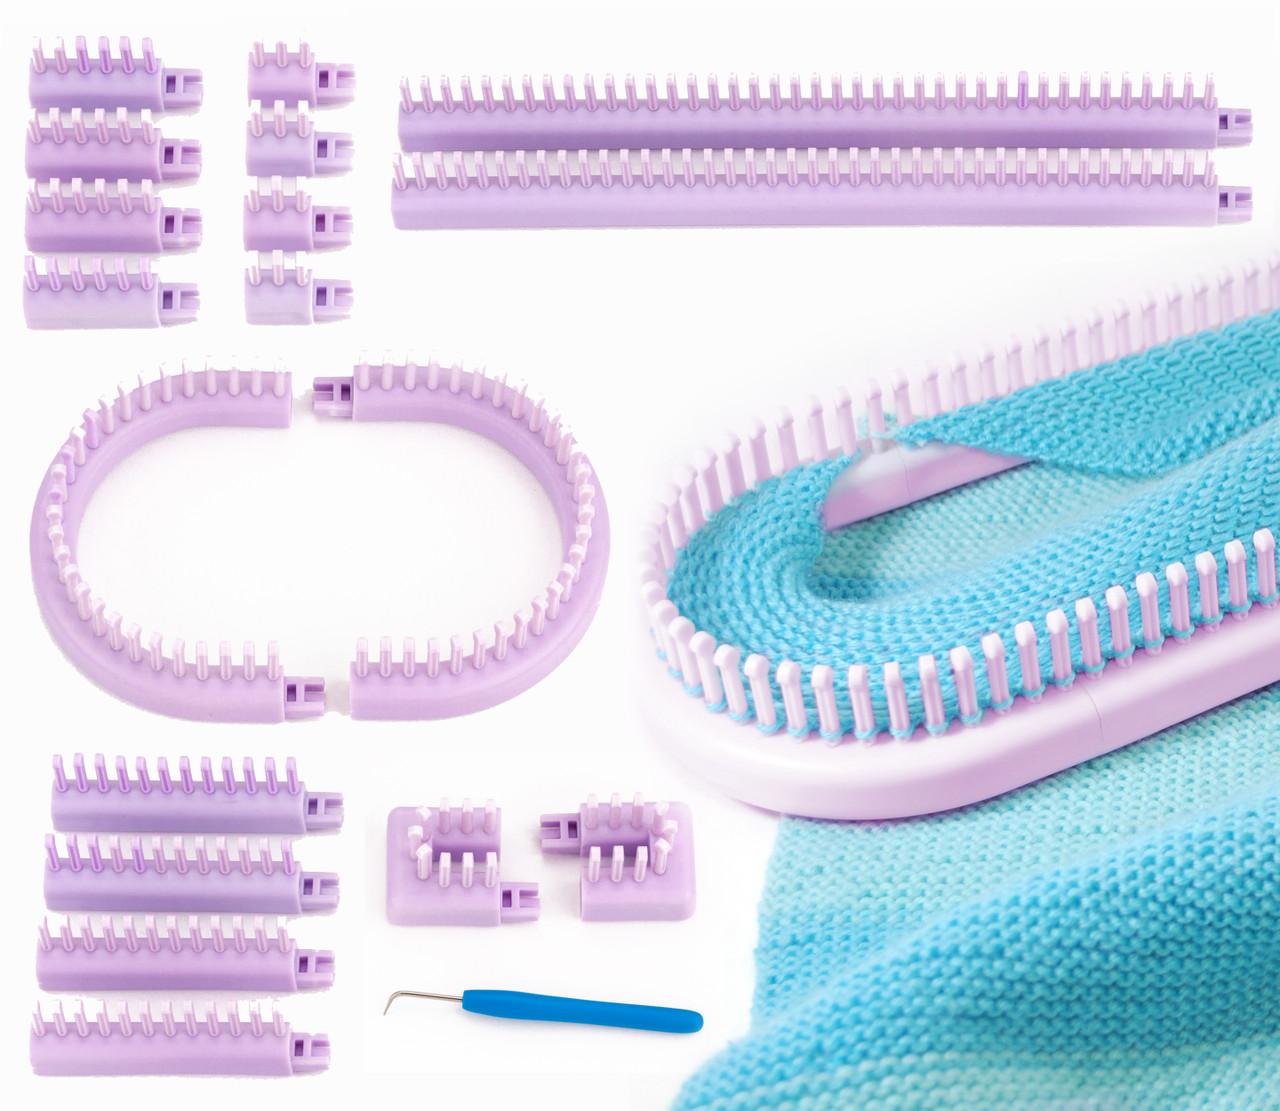 The loom knitting kit includs 18 parts that can be set up in numerous configurations.